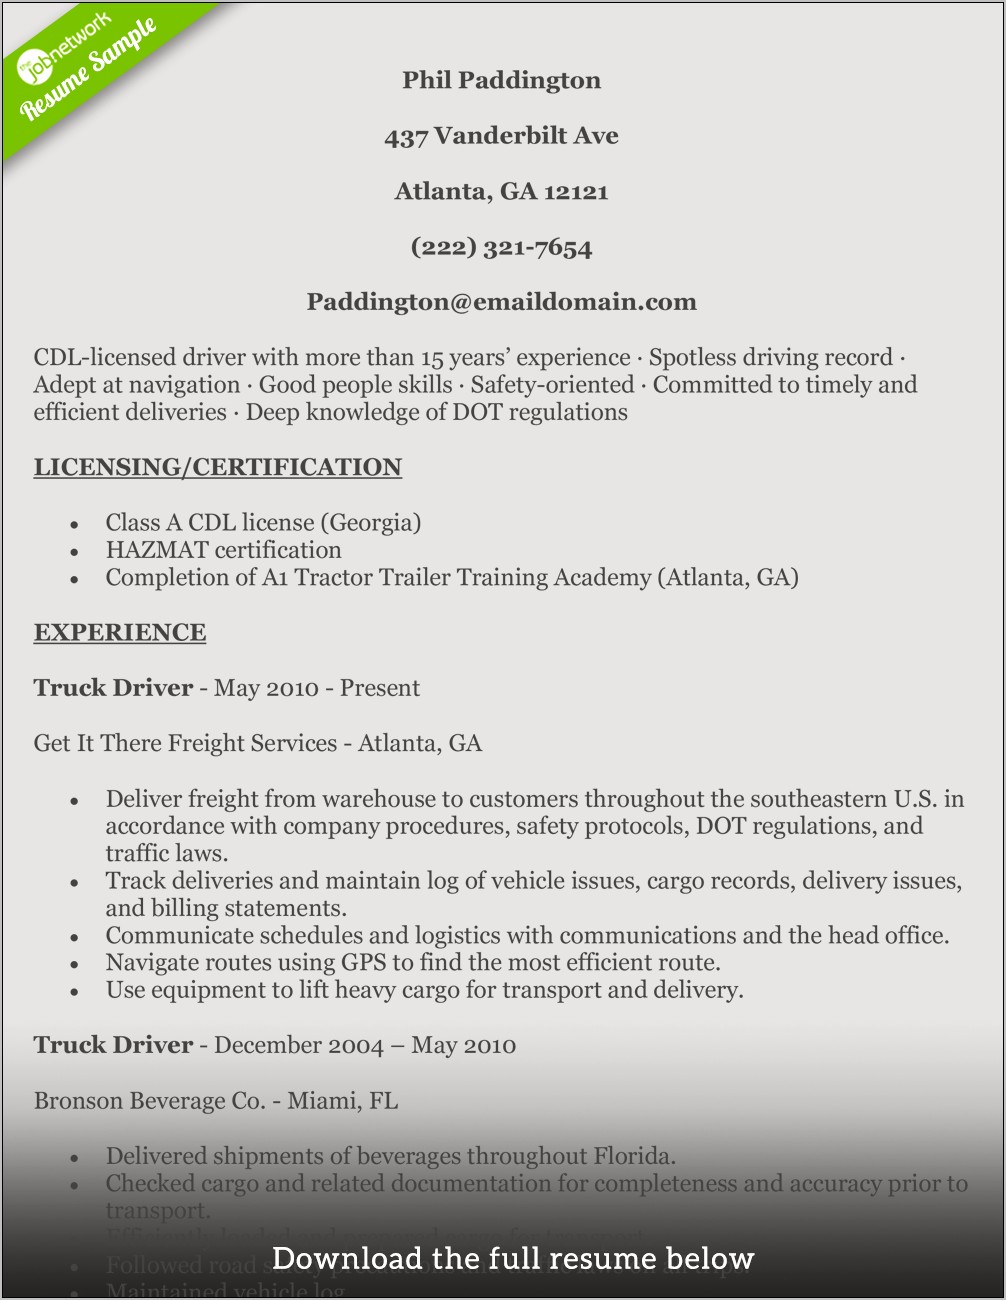 Resume Objective Statement For Driver